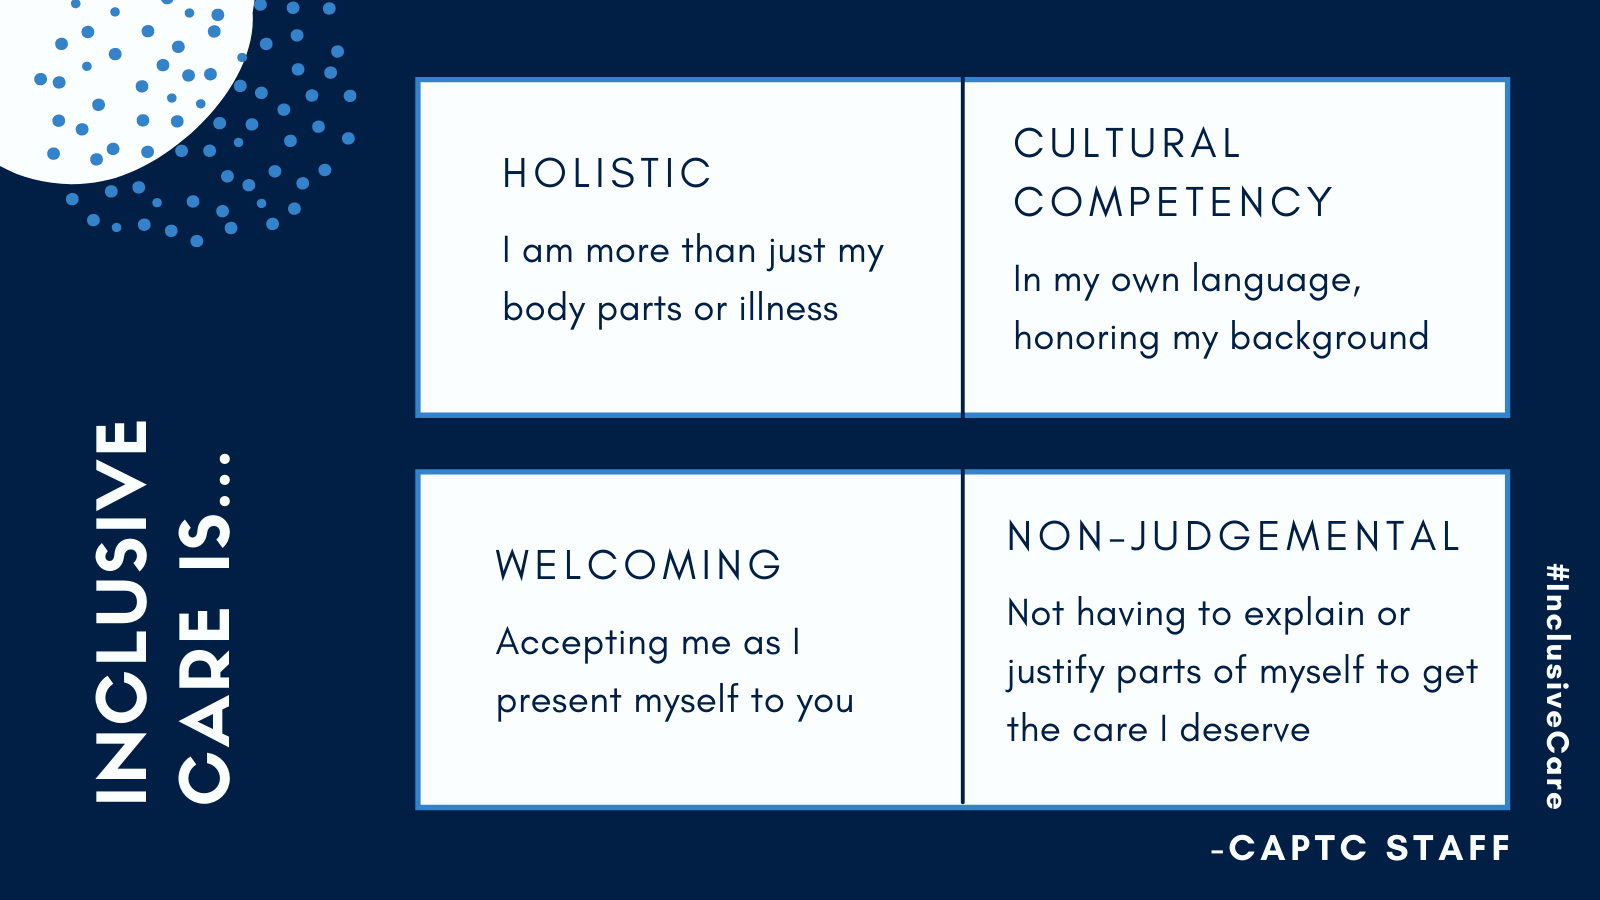 Inclusive care is: holistic: I am more than just my body parts or illness; Culture competency: In my own language, honoring my background; welcoming: Accepting me as I present myself to you; non-judgemental: Not having to explain or justify parts of myself to get the care I deserve- CAPTC staff